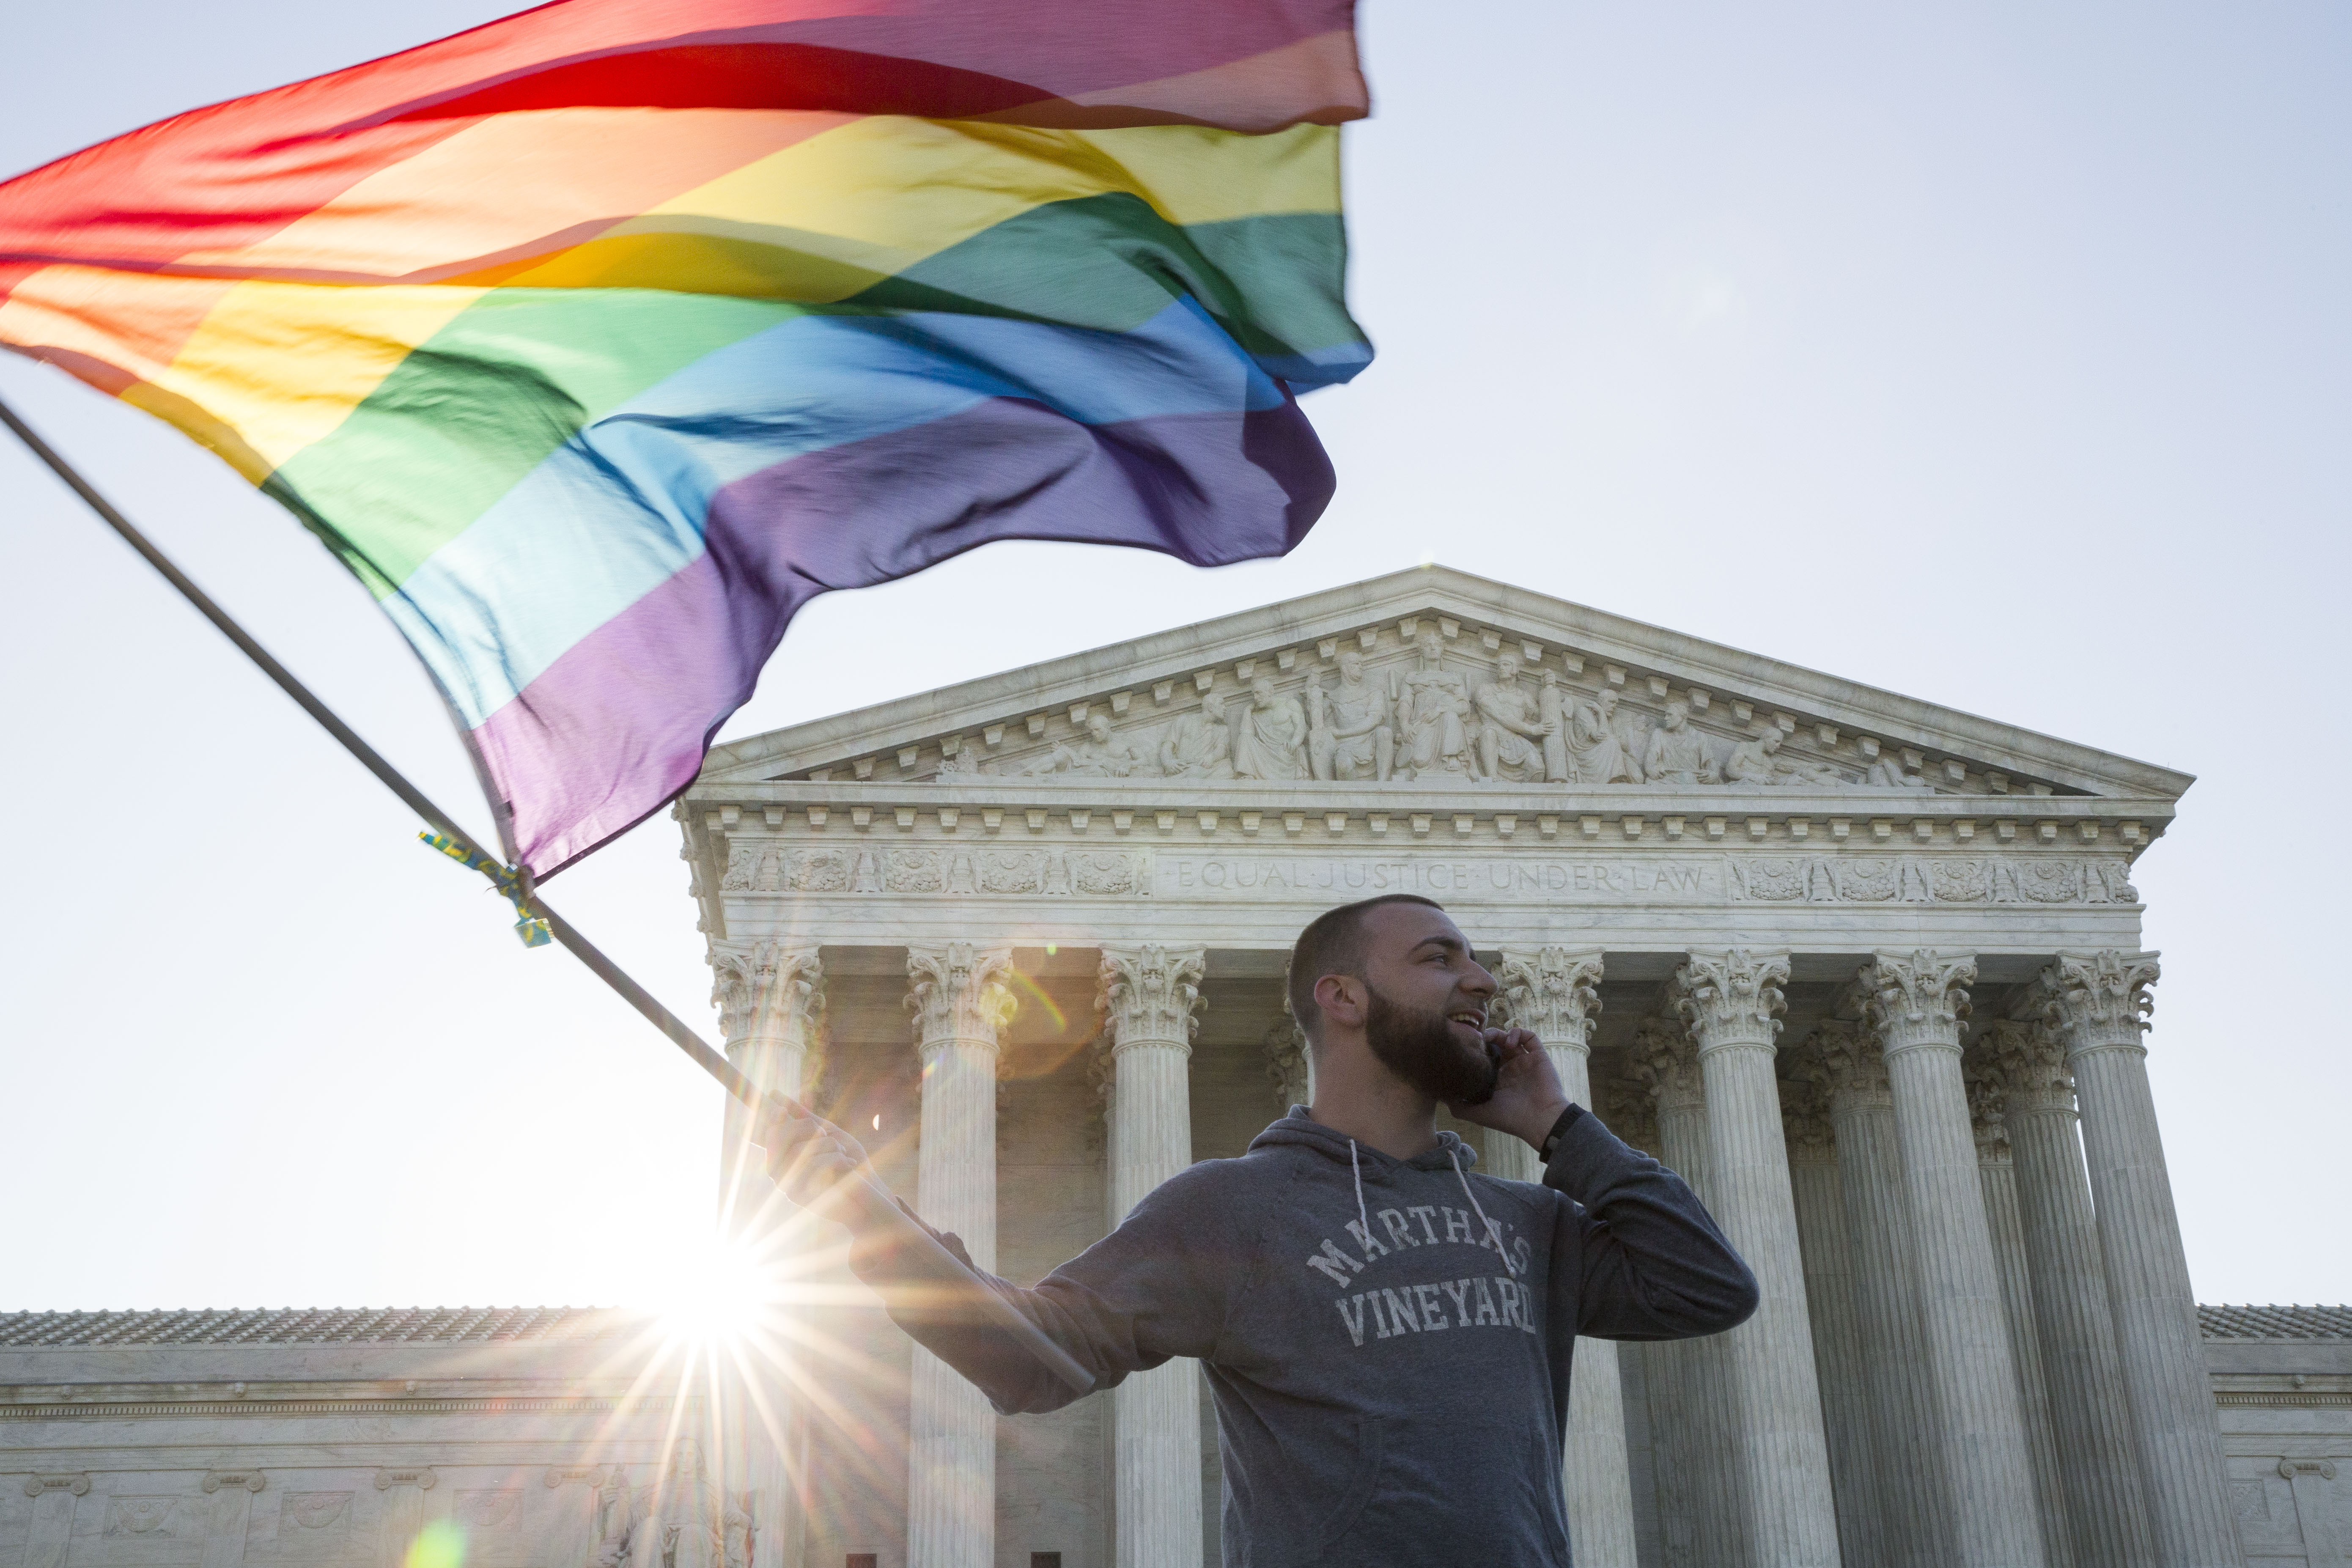 A marriage equality supporter waves a Pride flag in front of the US Supreme Court.